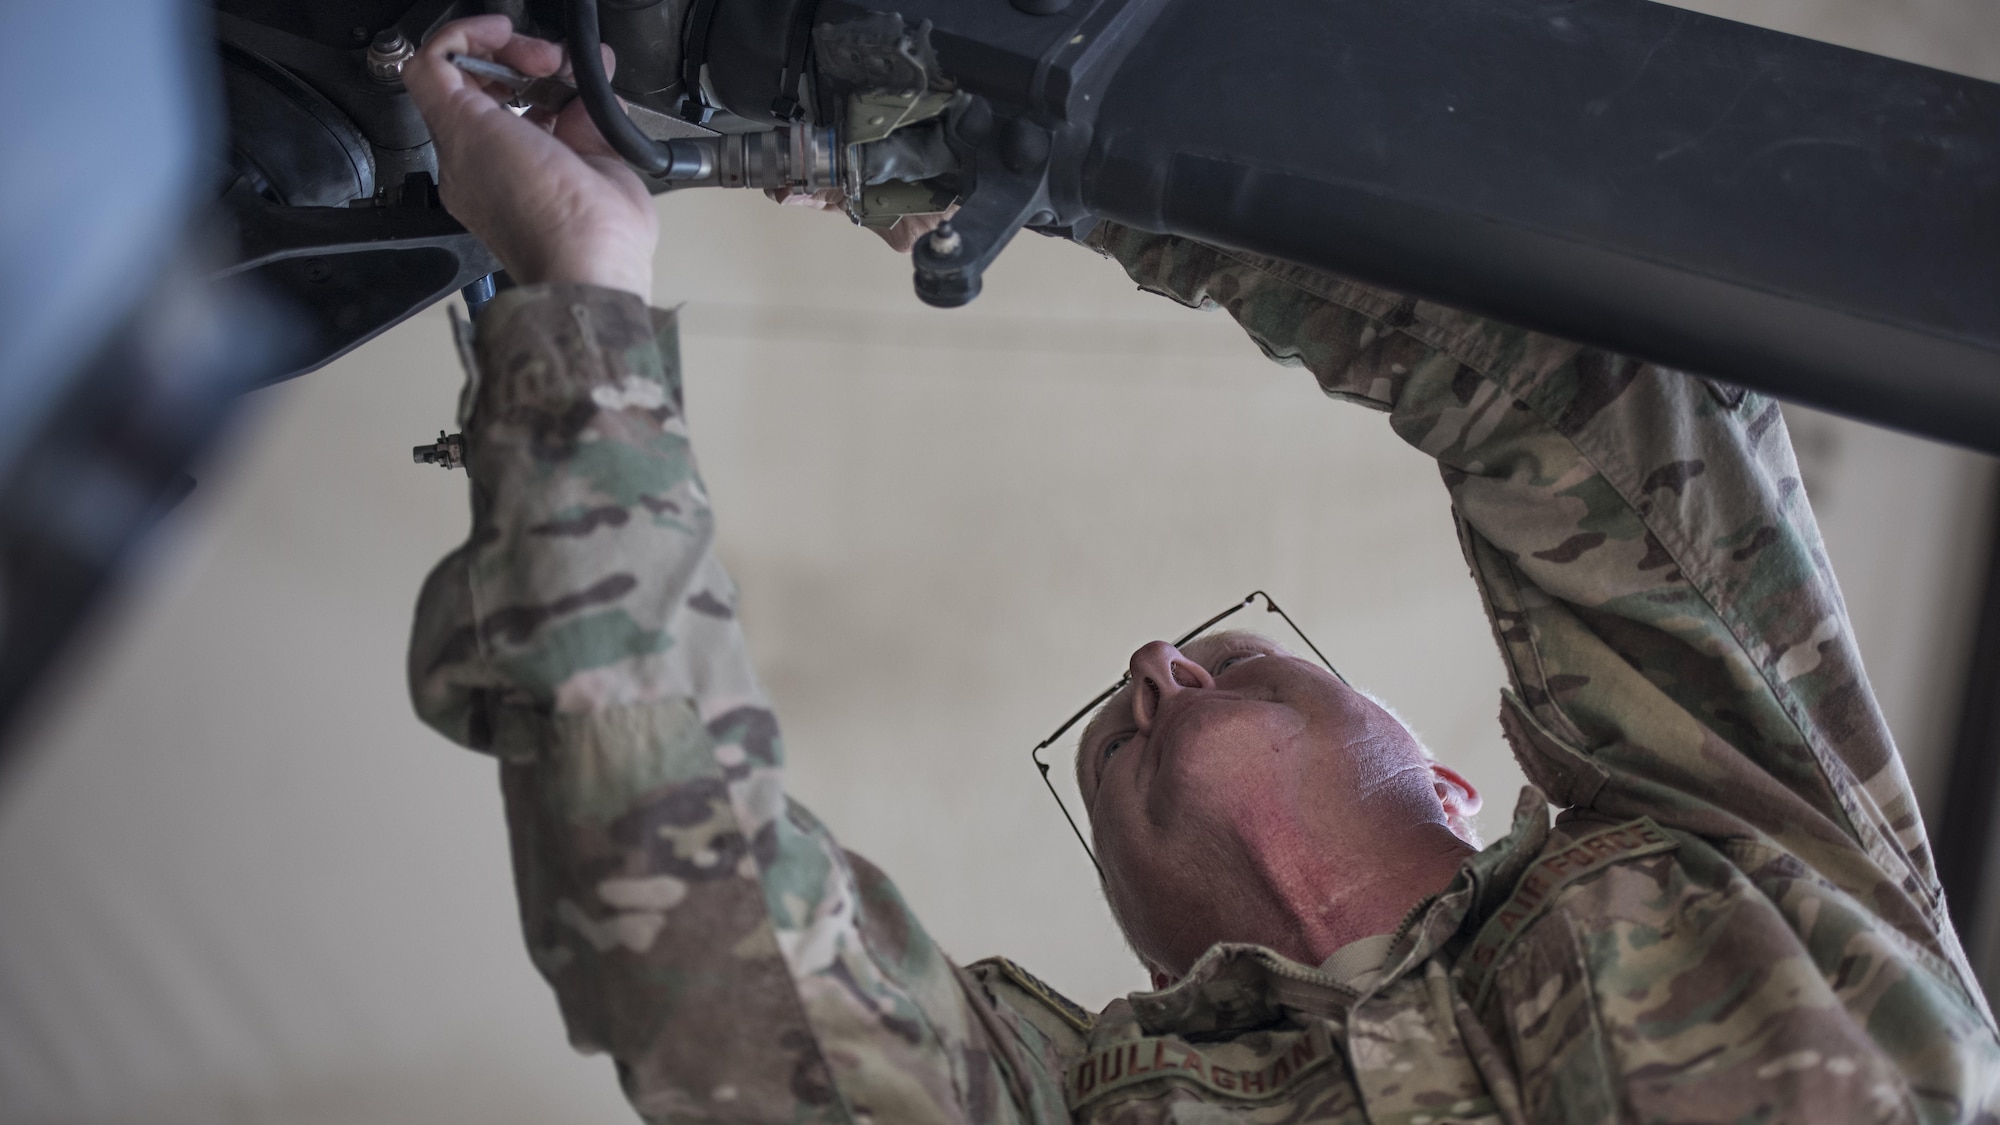 Master Sgt. James Dullaghan, 455th Expeditionary Aircraft Maintenance Squadron Helicopter Maintenance Unit HH-60 Pave Hawk dedicated crew chief, works on the tail rotors of an HH-60 during a 50-hour inspection Jan. 19, 2017 at Bagram Airfield Afghanistan. This is Dullaghan’s first deployment since reenlisting in the Air Force after a twenty-year break in service. (U.S. Air Force photo by Staff Sgt. Katherine Spessa)